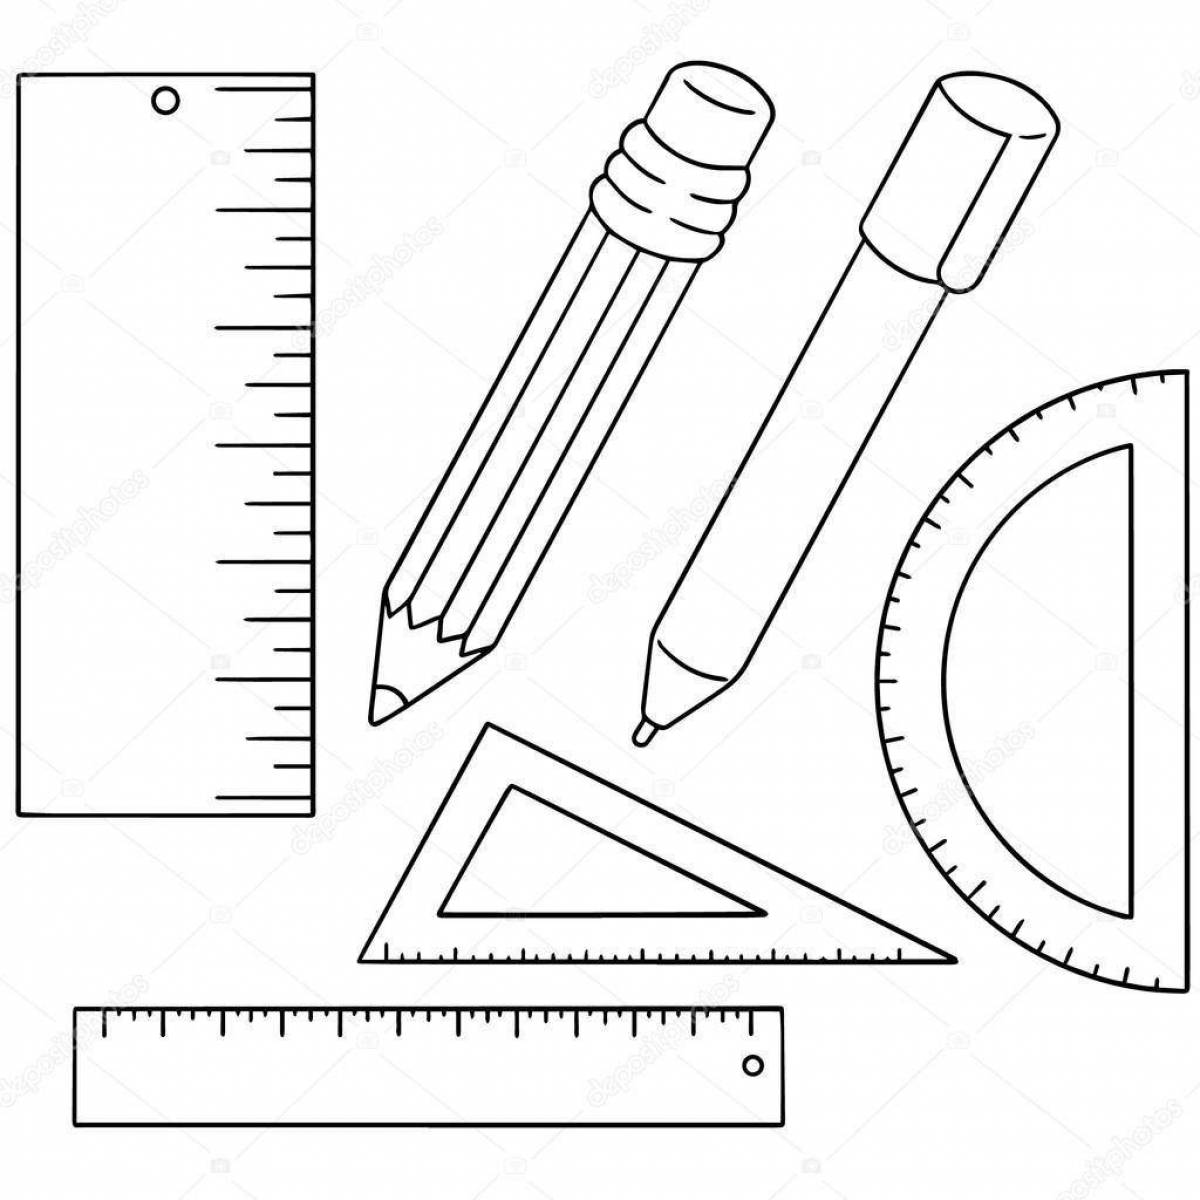 Adorable ruler coloring page for kids